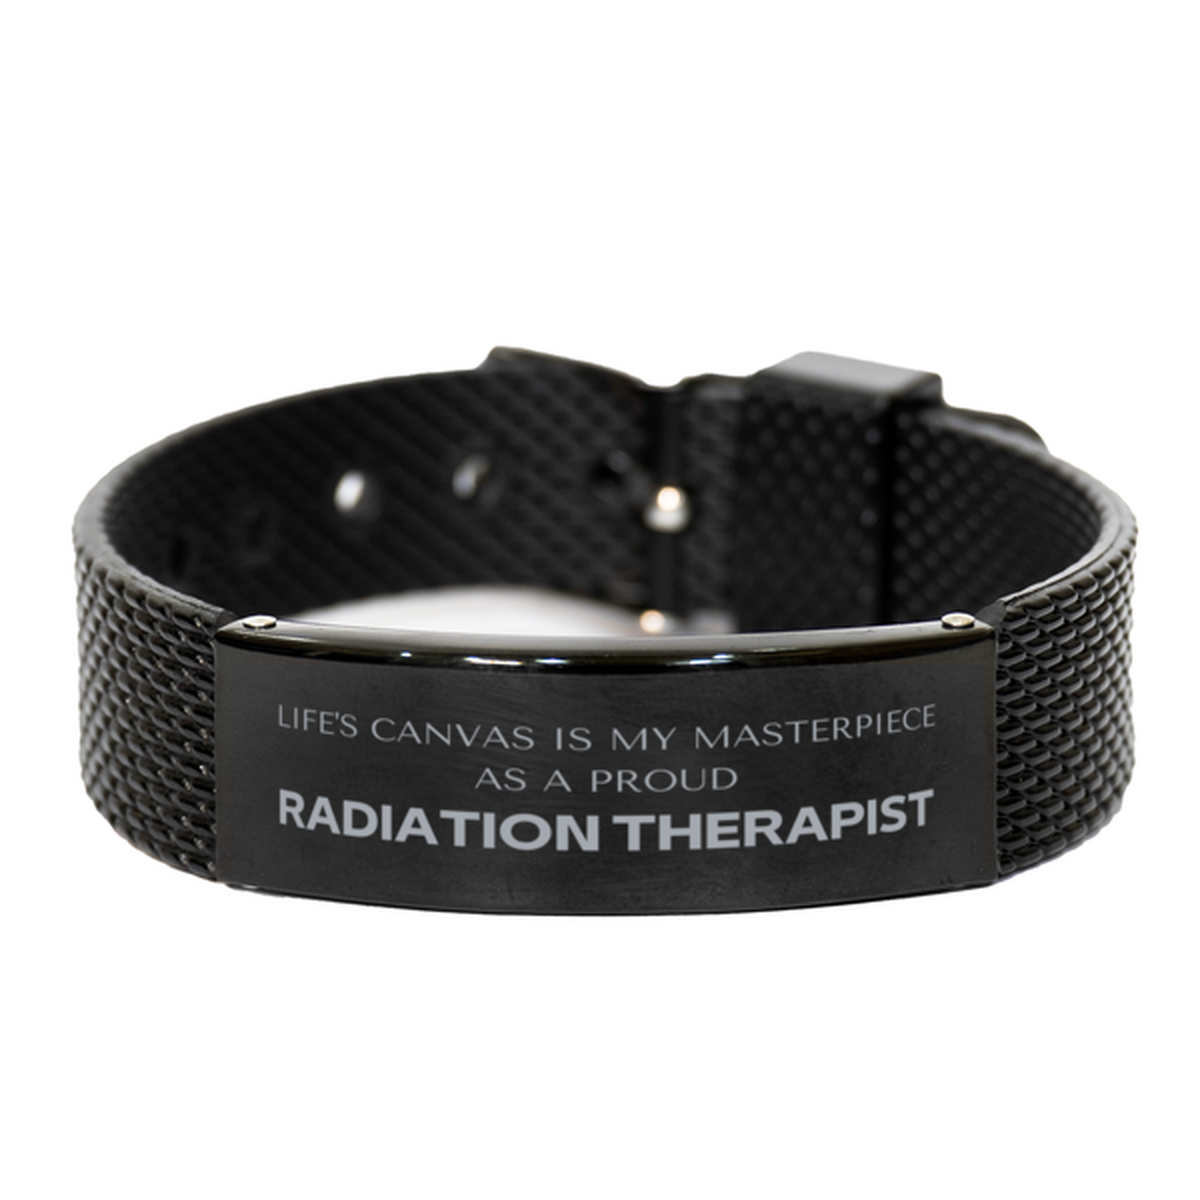 Proud Radiation Therapist Gifts, Life's canvas is my masterpiece, Epic Birthday Christmas Unique Black Shark Mesh Bracelet For Radiation Therapist, Coworkers, Men, Women, Friends